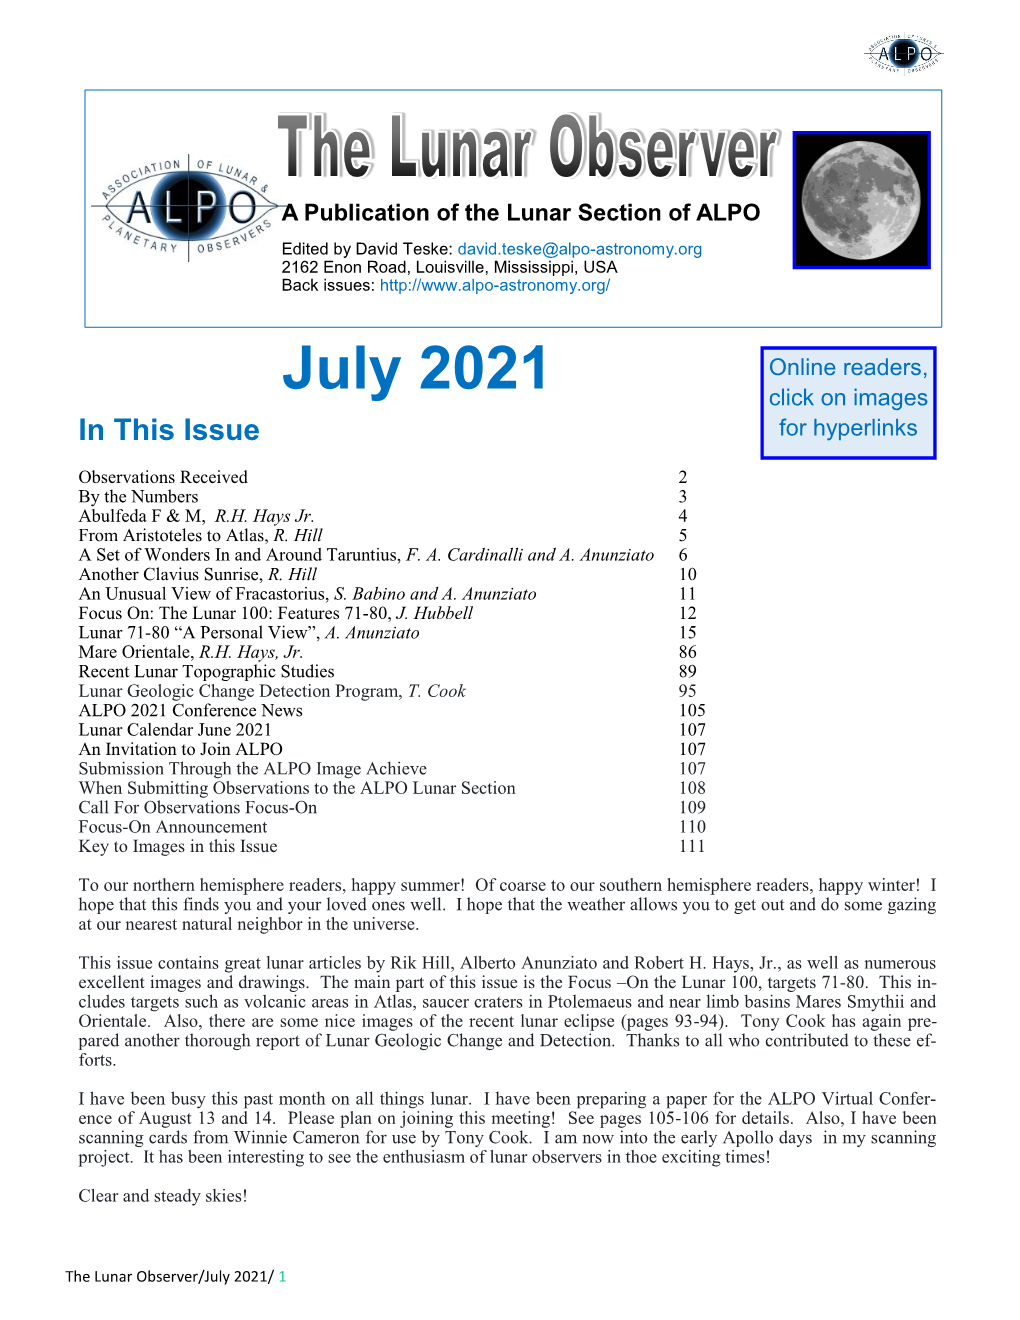 July 2021 the Lunar Observer by the Numbers